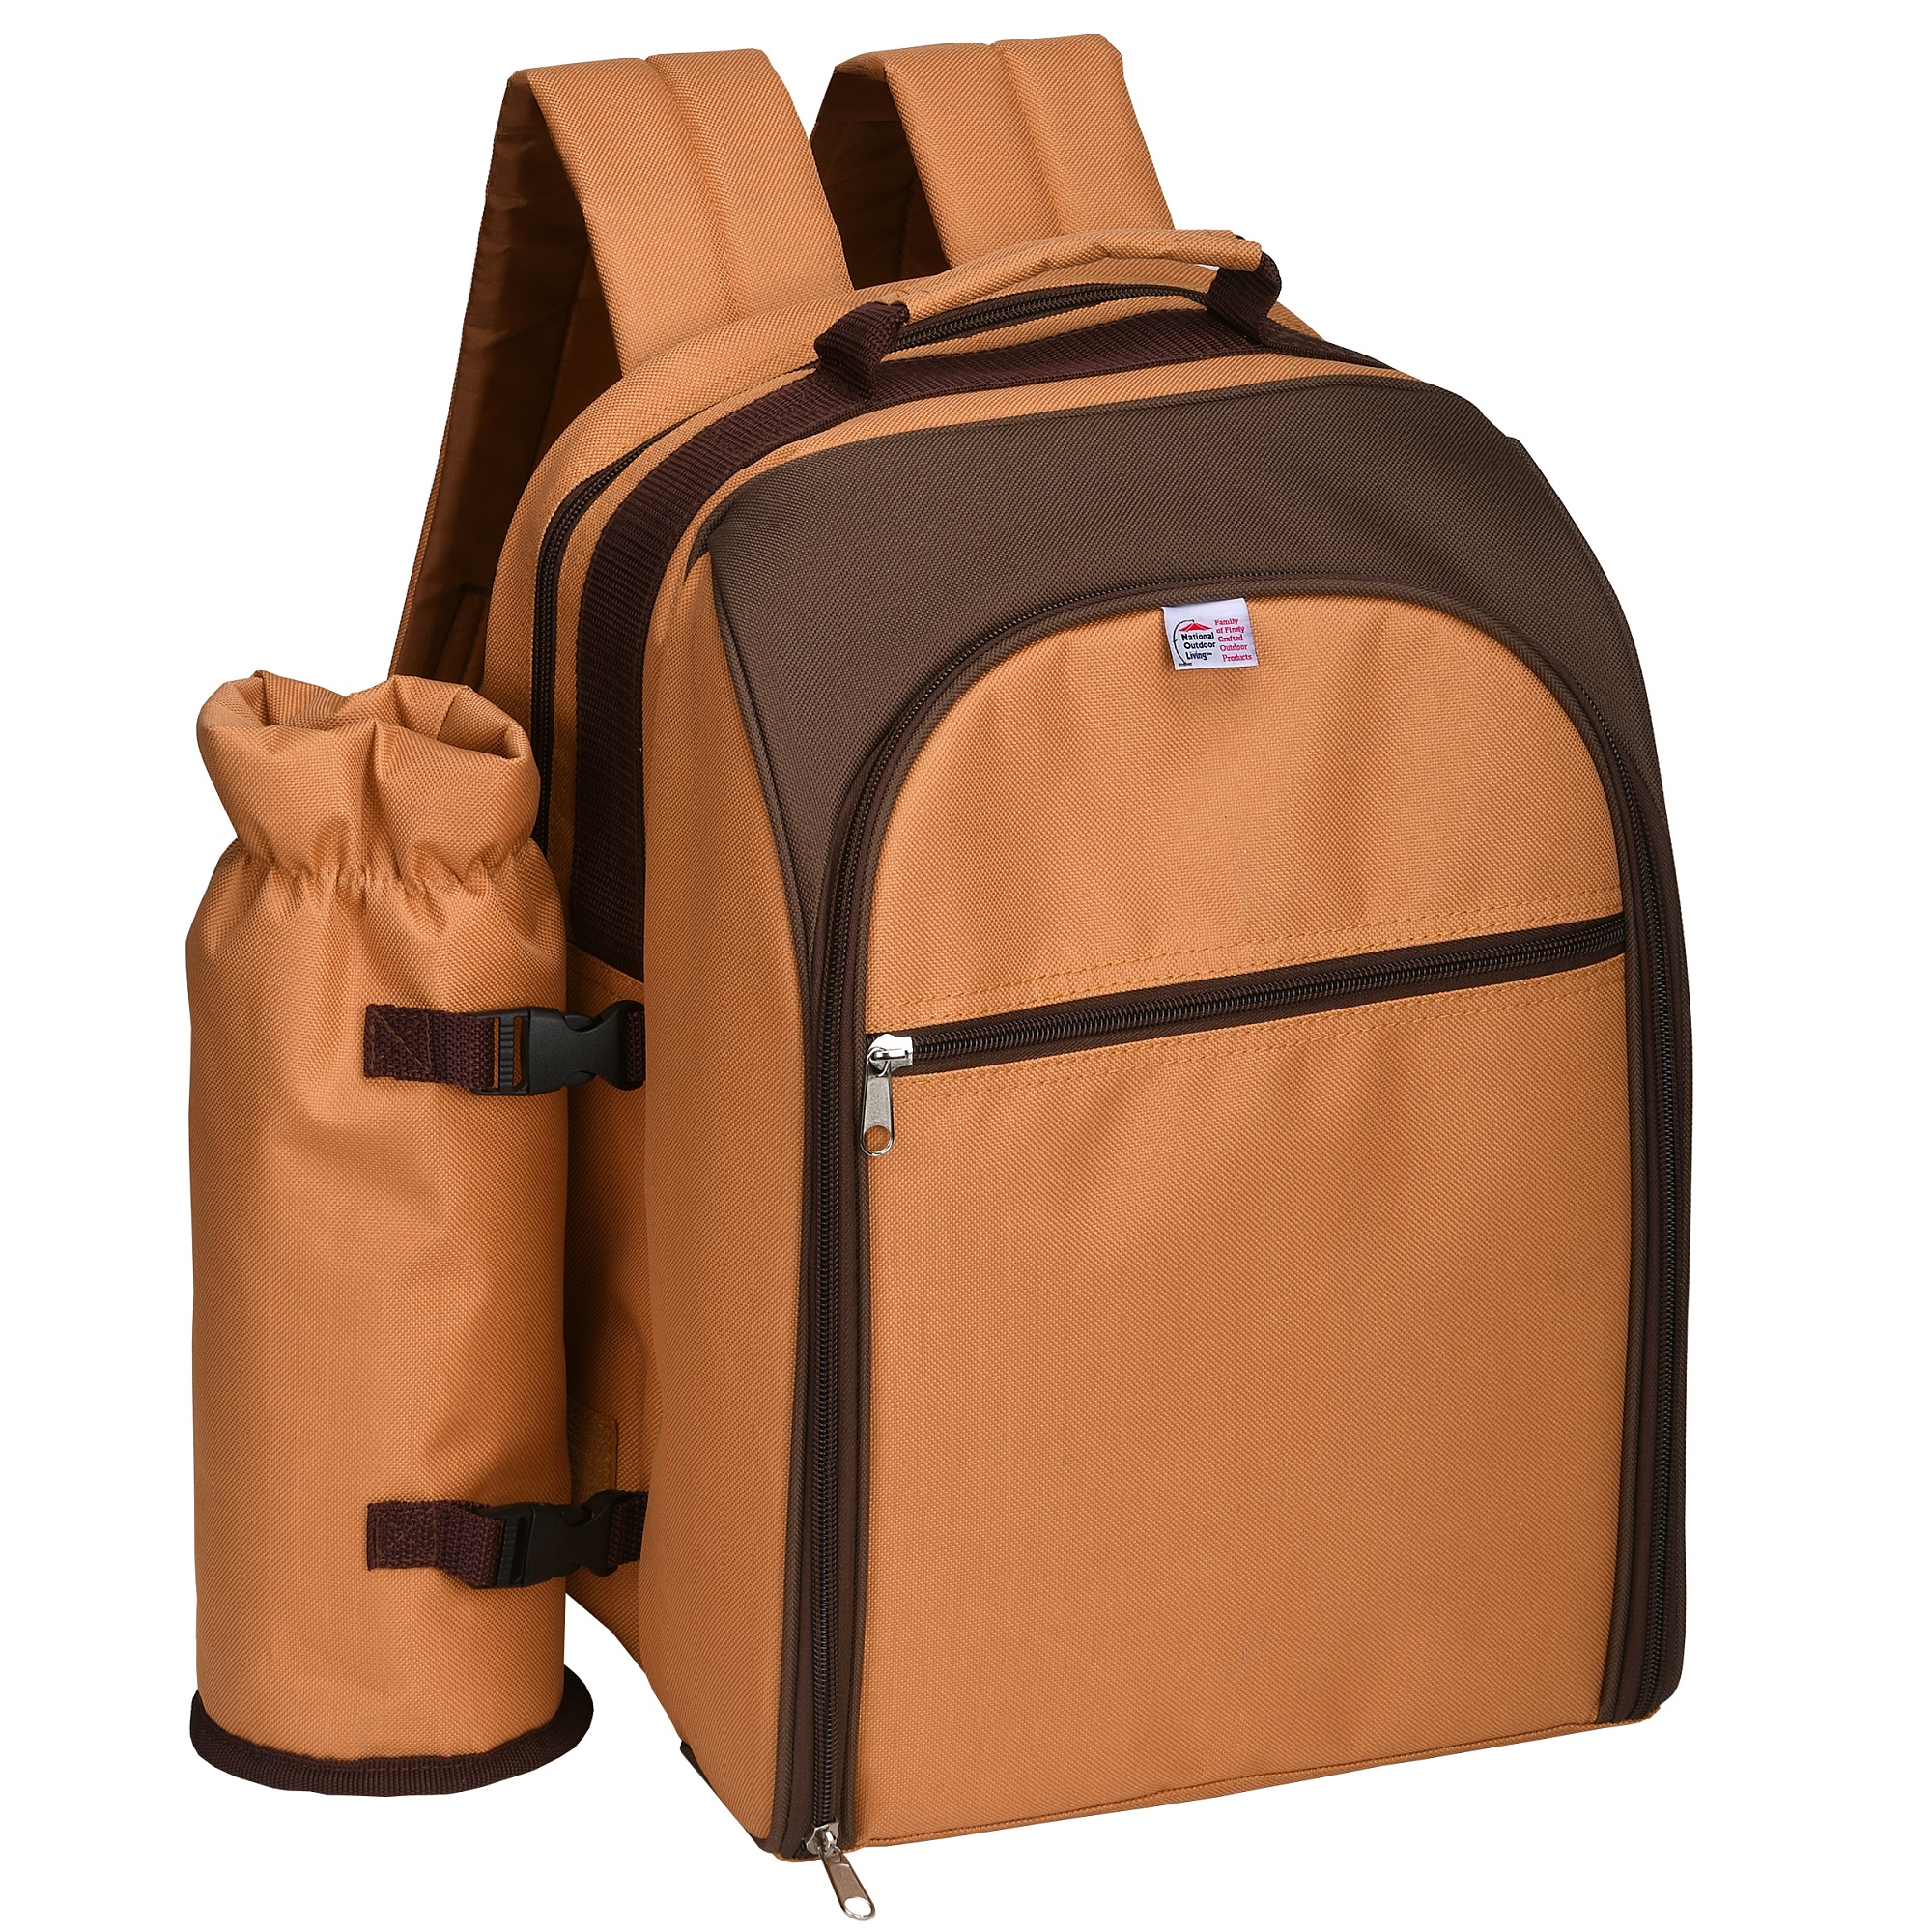 8.5" x 11" Orange and Brown Backpack Style 2-Person Picnic Kit Cooler - image 1 of 4